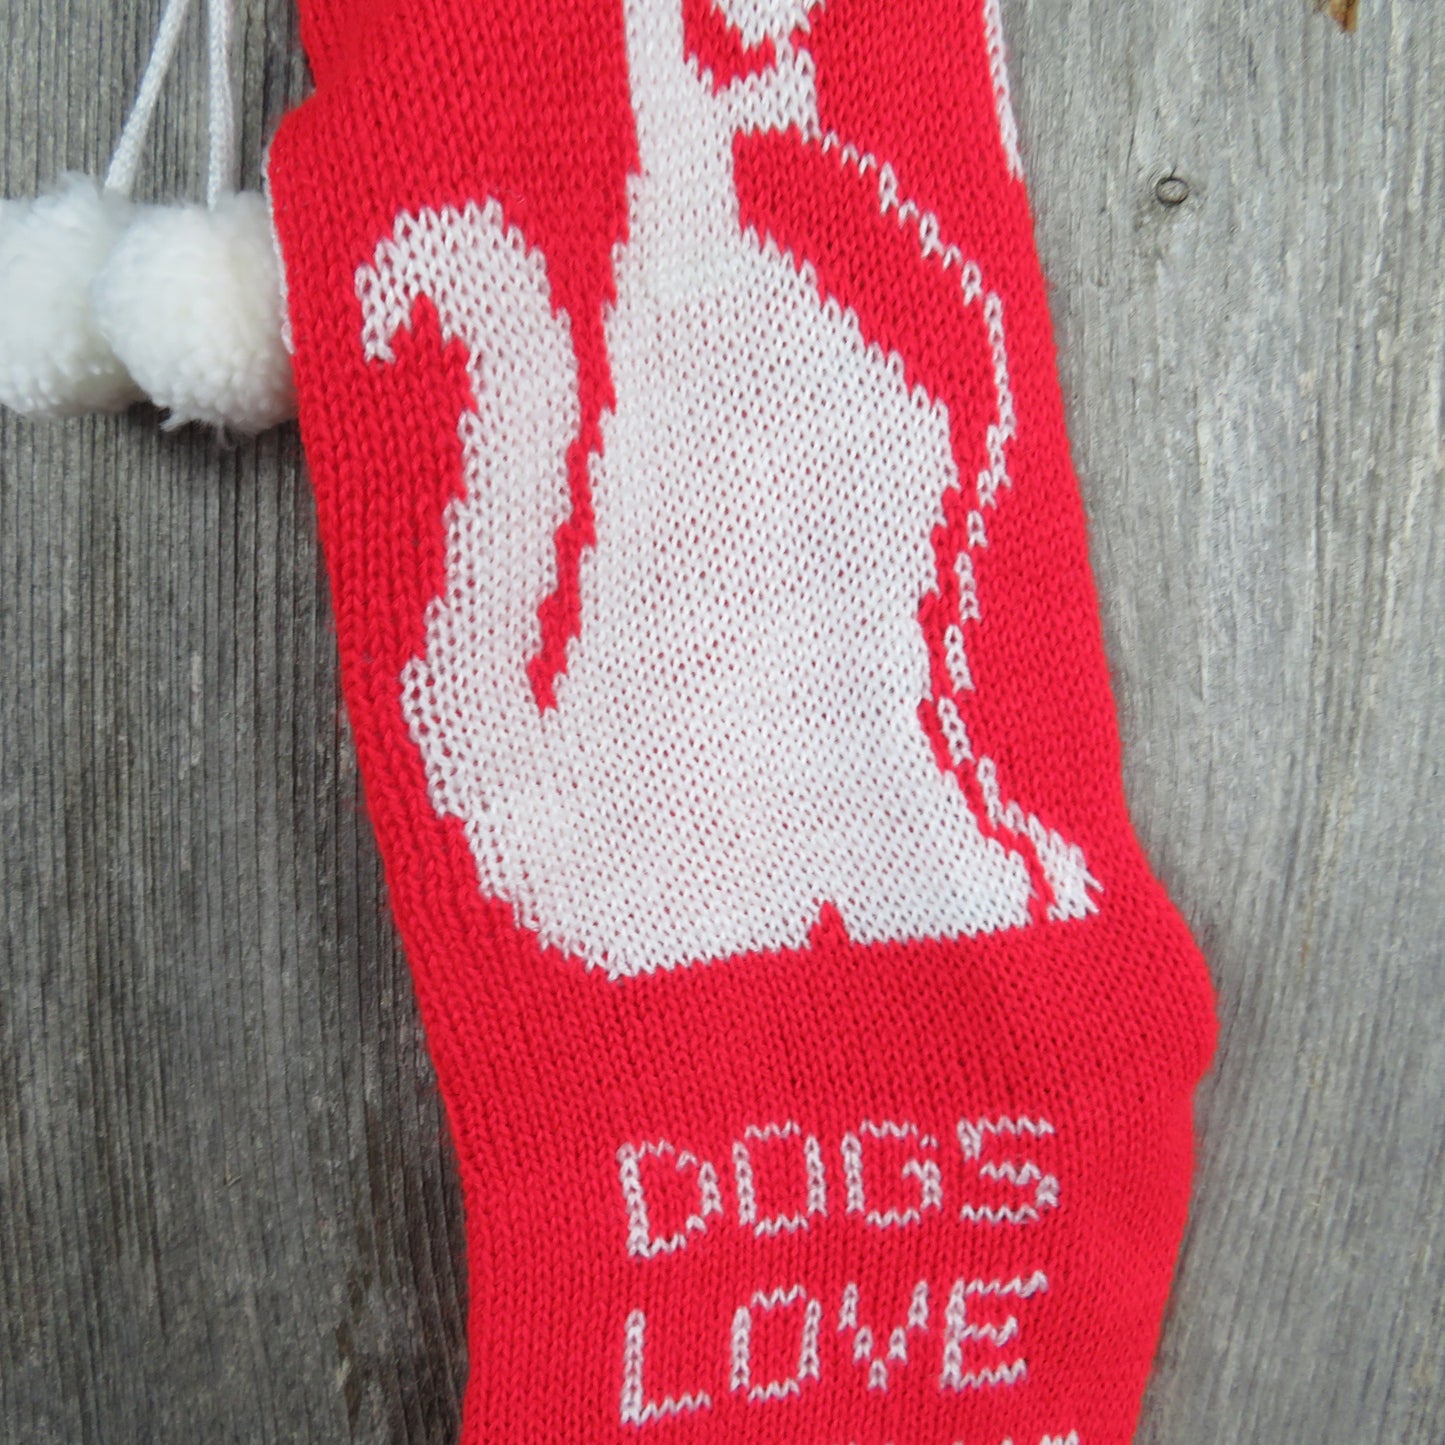 Vintage Dog Pet Knit Stocking Dogs Love Christmas Too Knitted Knit Puppy 1980s Red White Green - At Grandma's Table